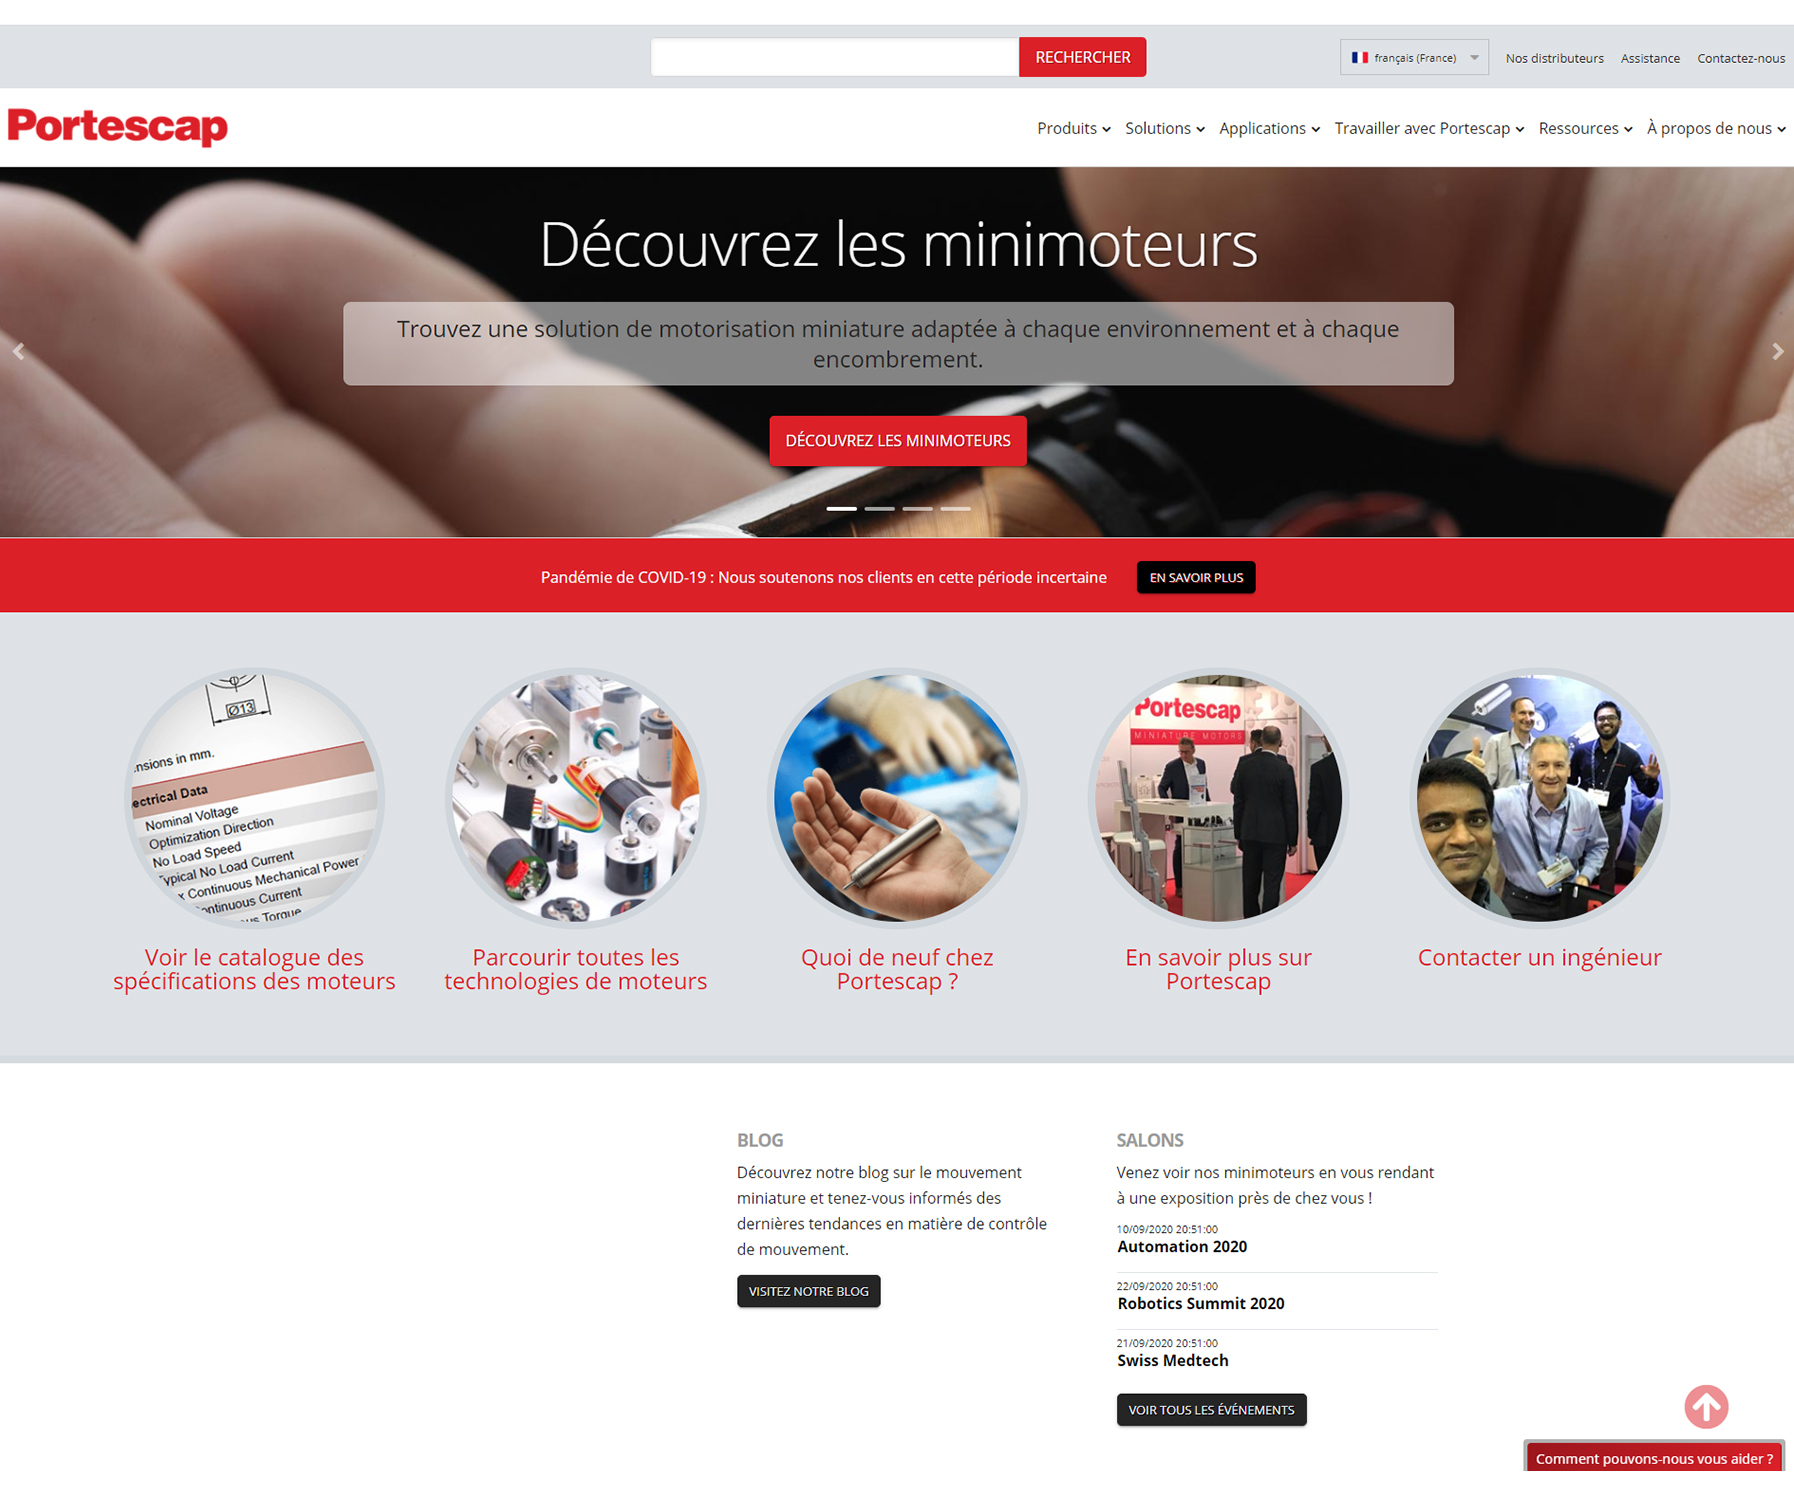 Portescap extends support for French speaking markets with new website